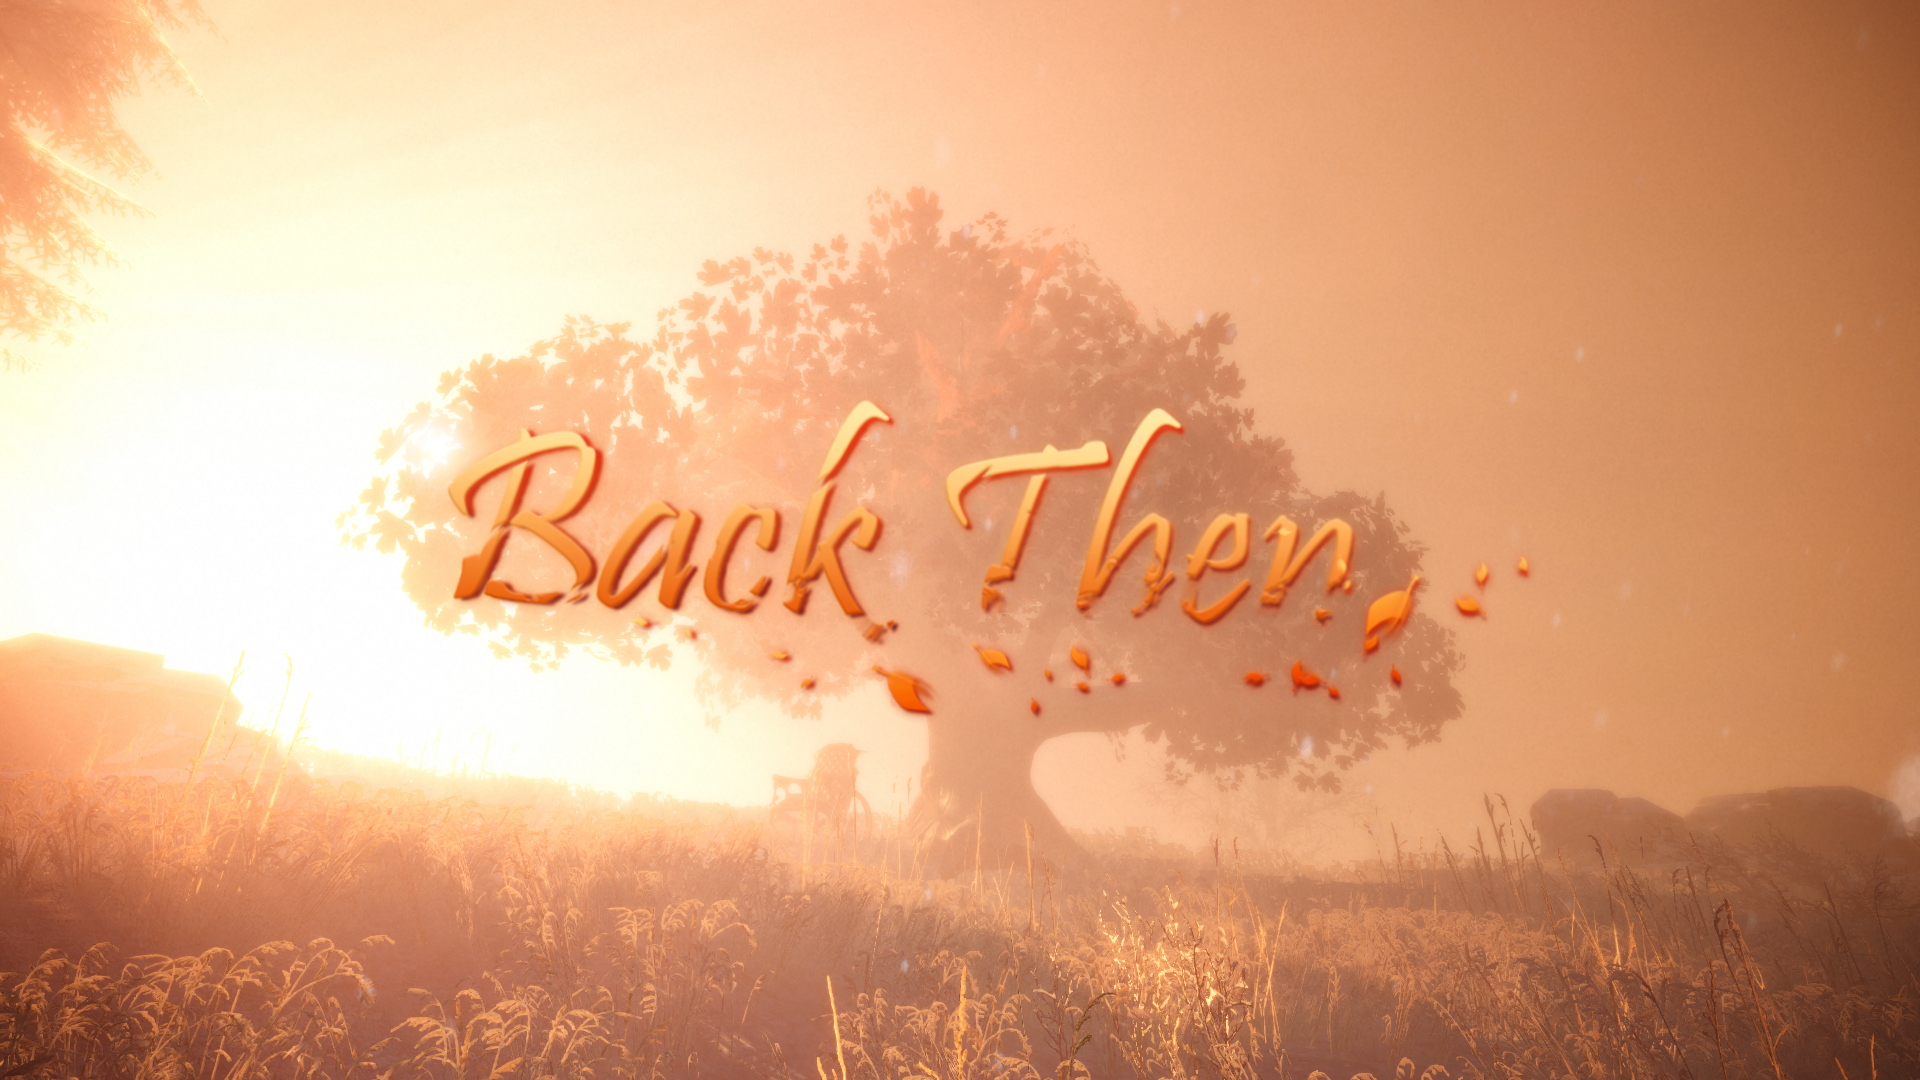 Back Then Windows game - IndieDB